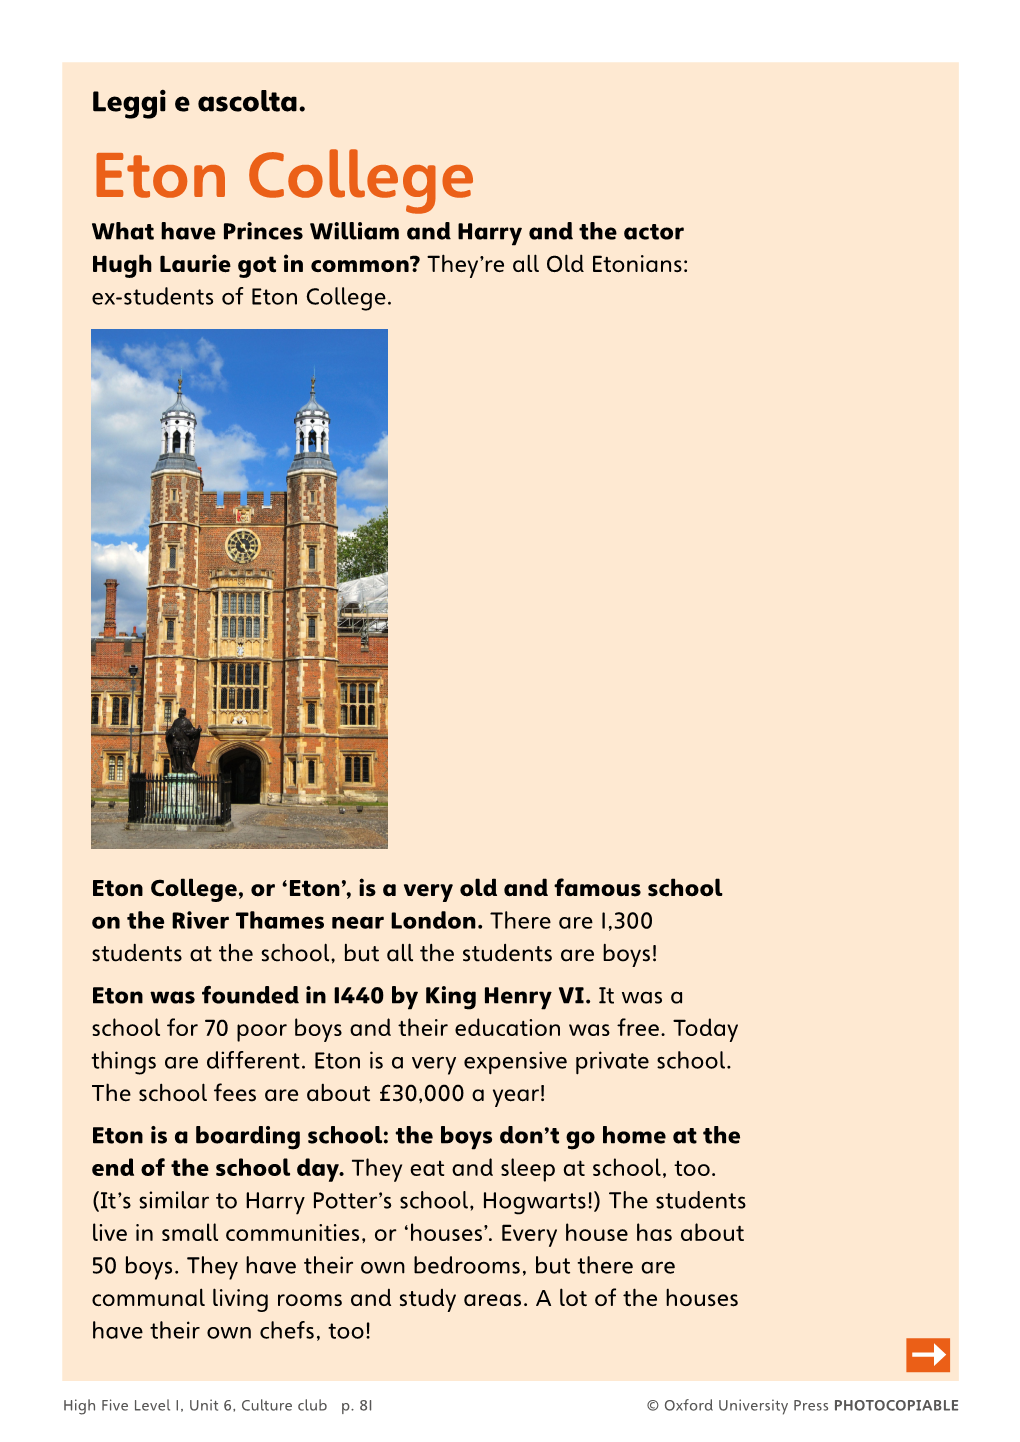 Eton College What Have Princes William and Harry and the Actor Hugh Laurie Got in Common? They’Re All Old Etonians: Ex-Students of Eton College